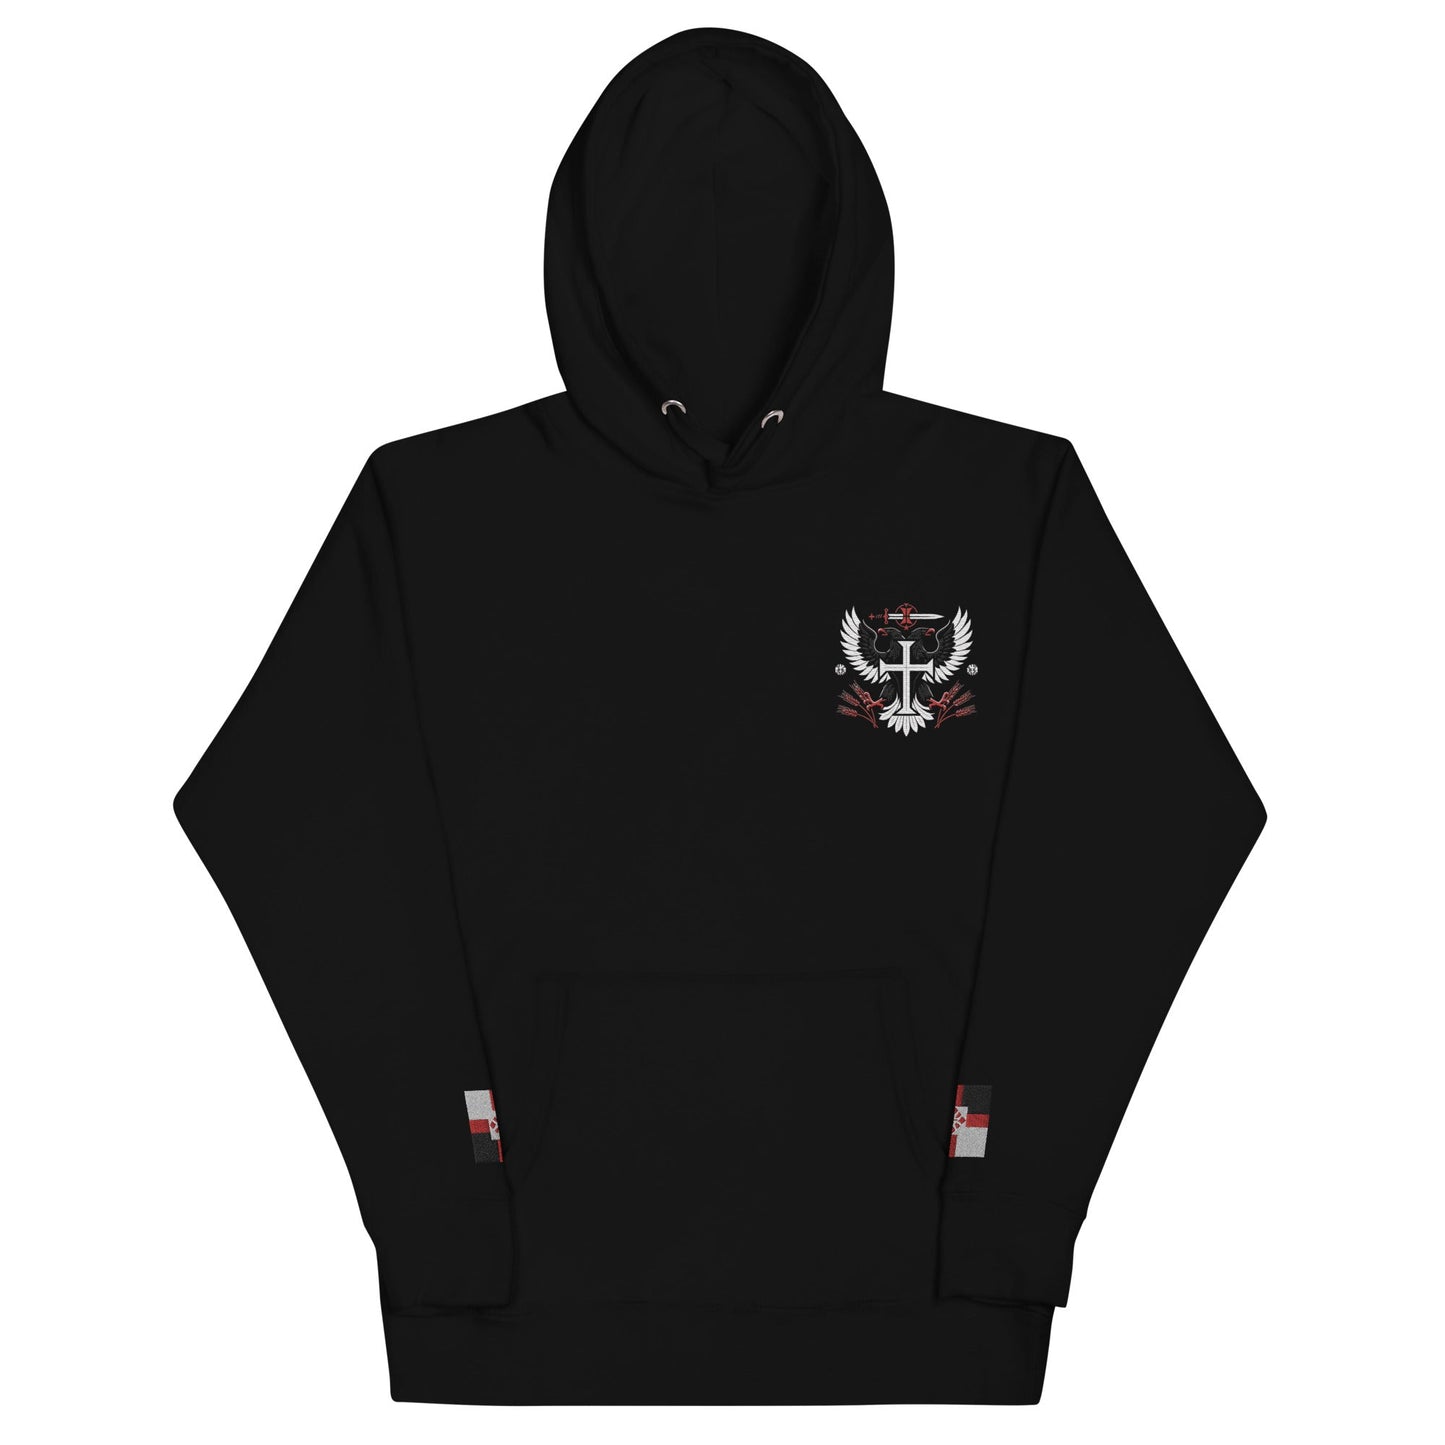 a black hoodie with a eagle and cross on it